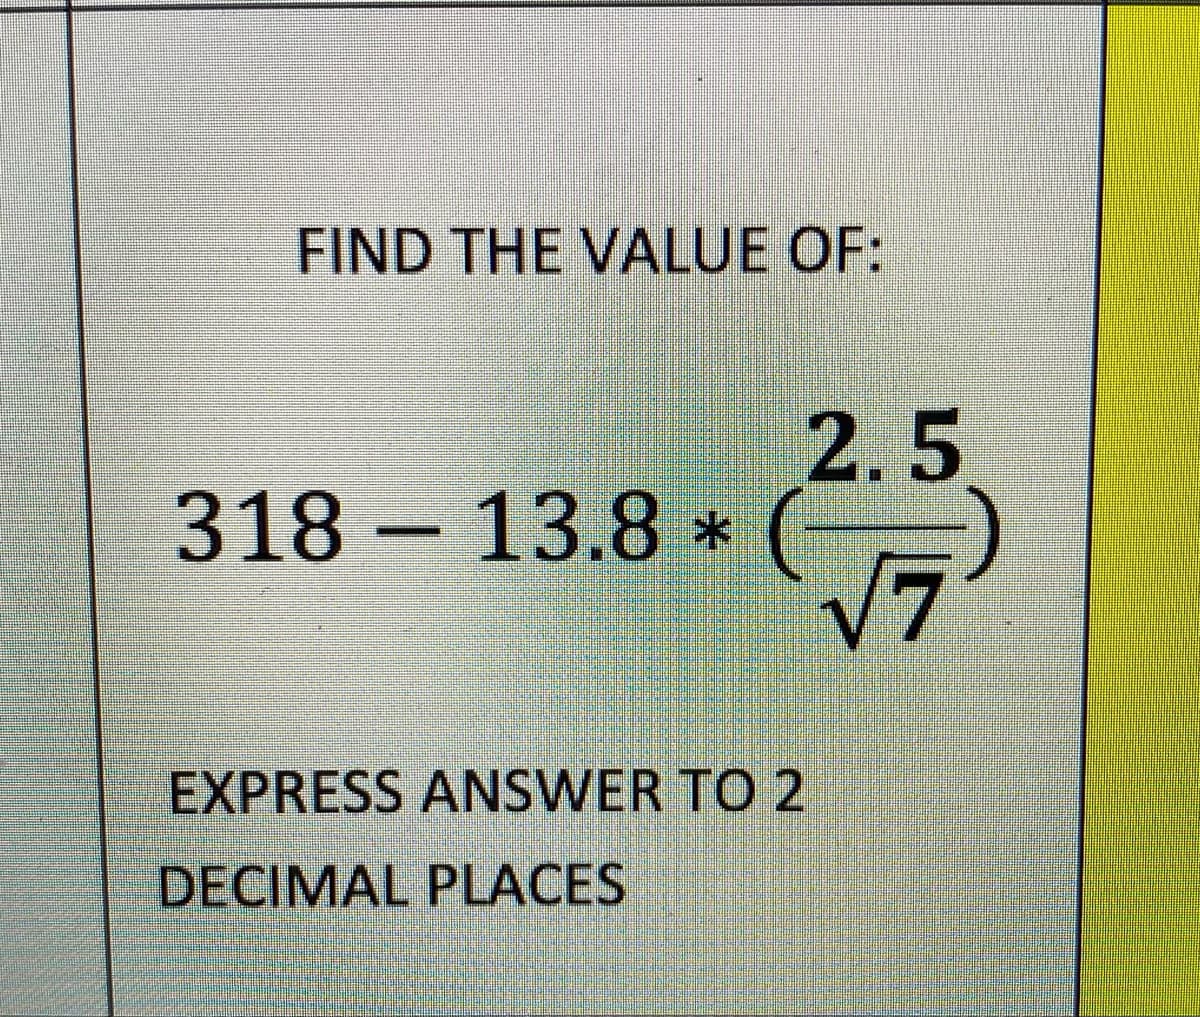 FIND THE VALUE OF:
2.5
-13.8 *
V7
EXPRESS ANSWER TO 2
DECIMAL PLACES
